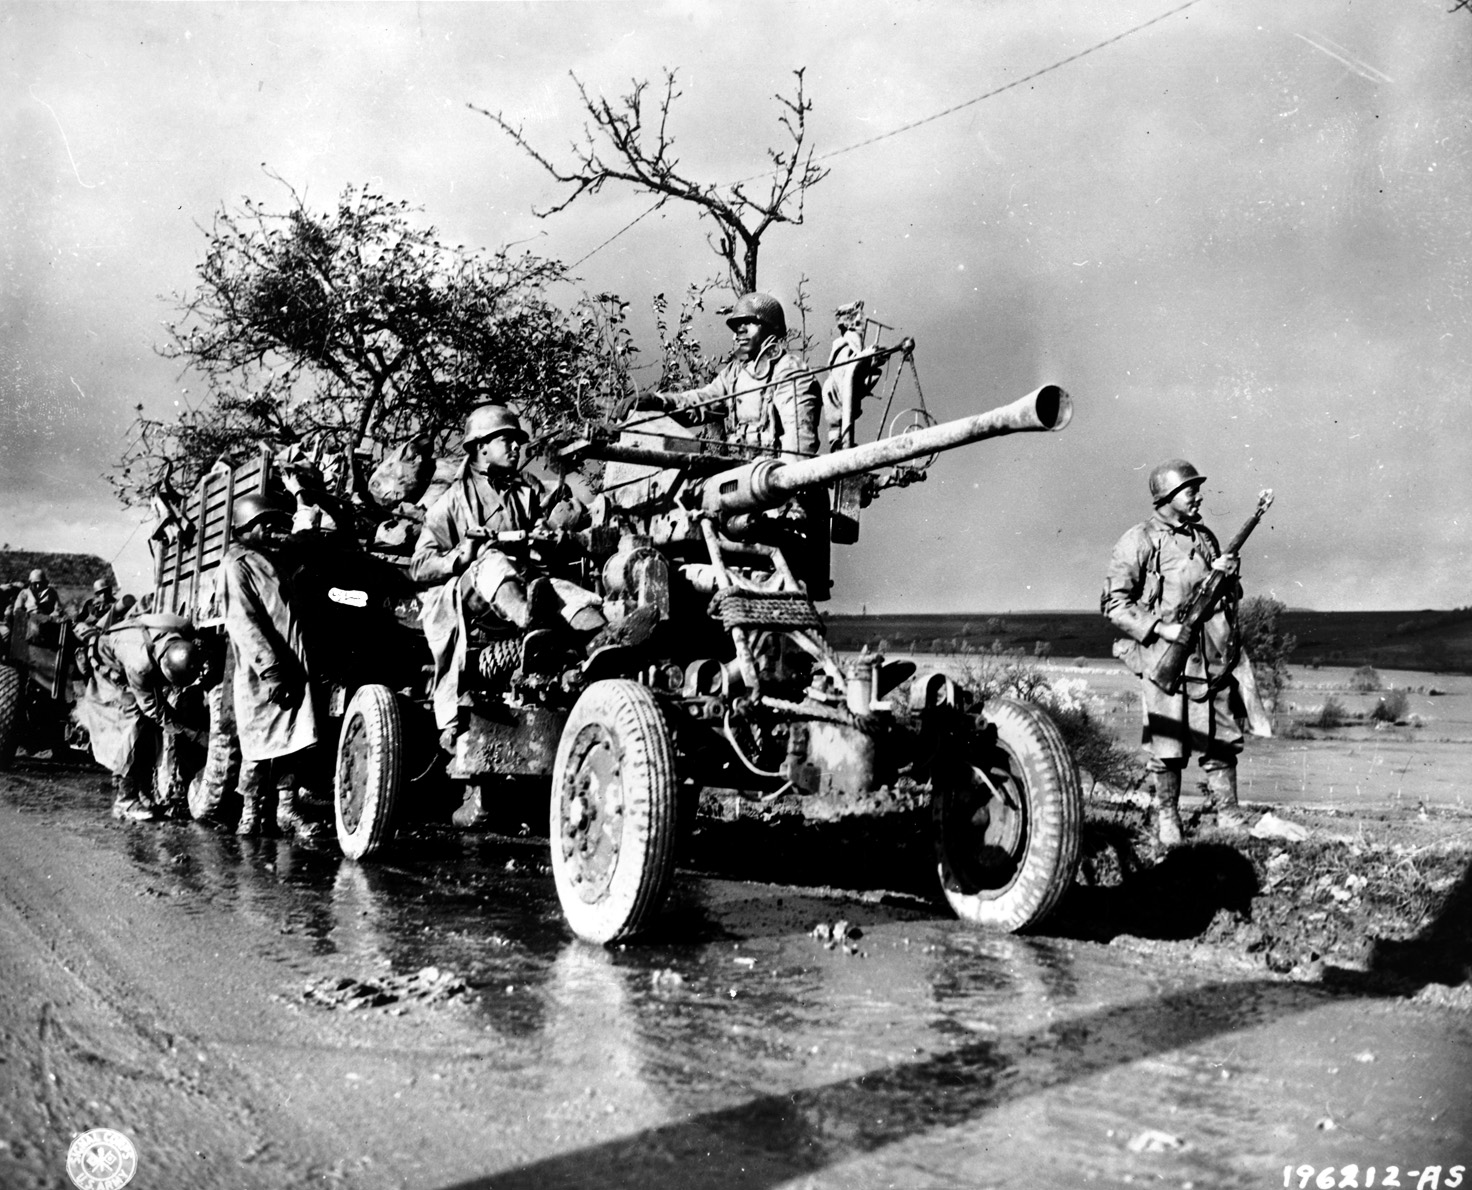 Members of the all-Black 452nd Anti-Aircraft Artillery Battalion stand watch for enemy planes while a convoy takes a short break.